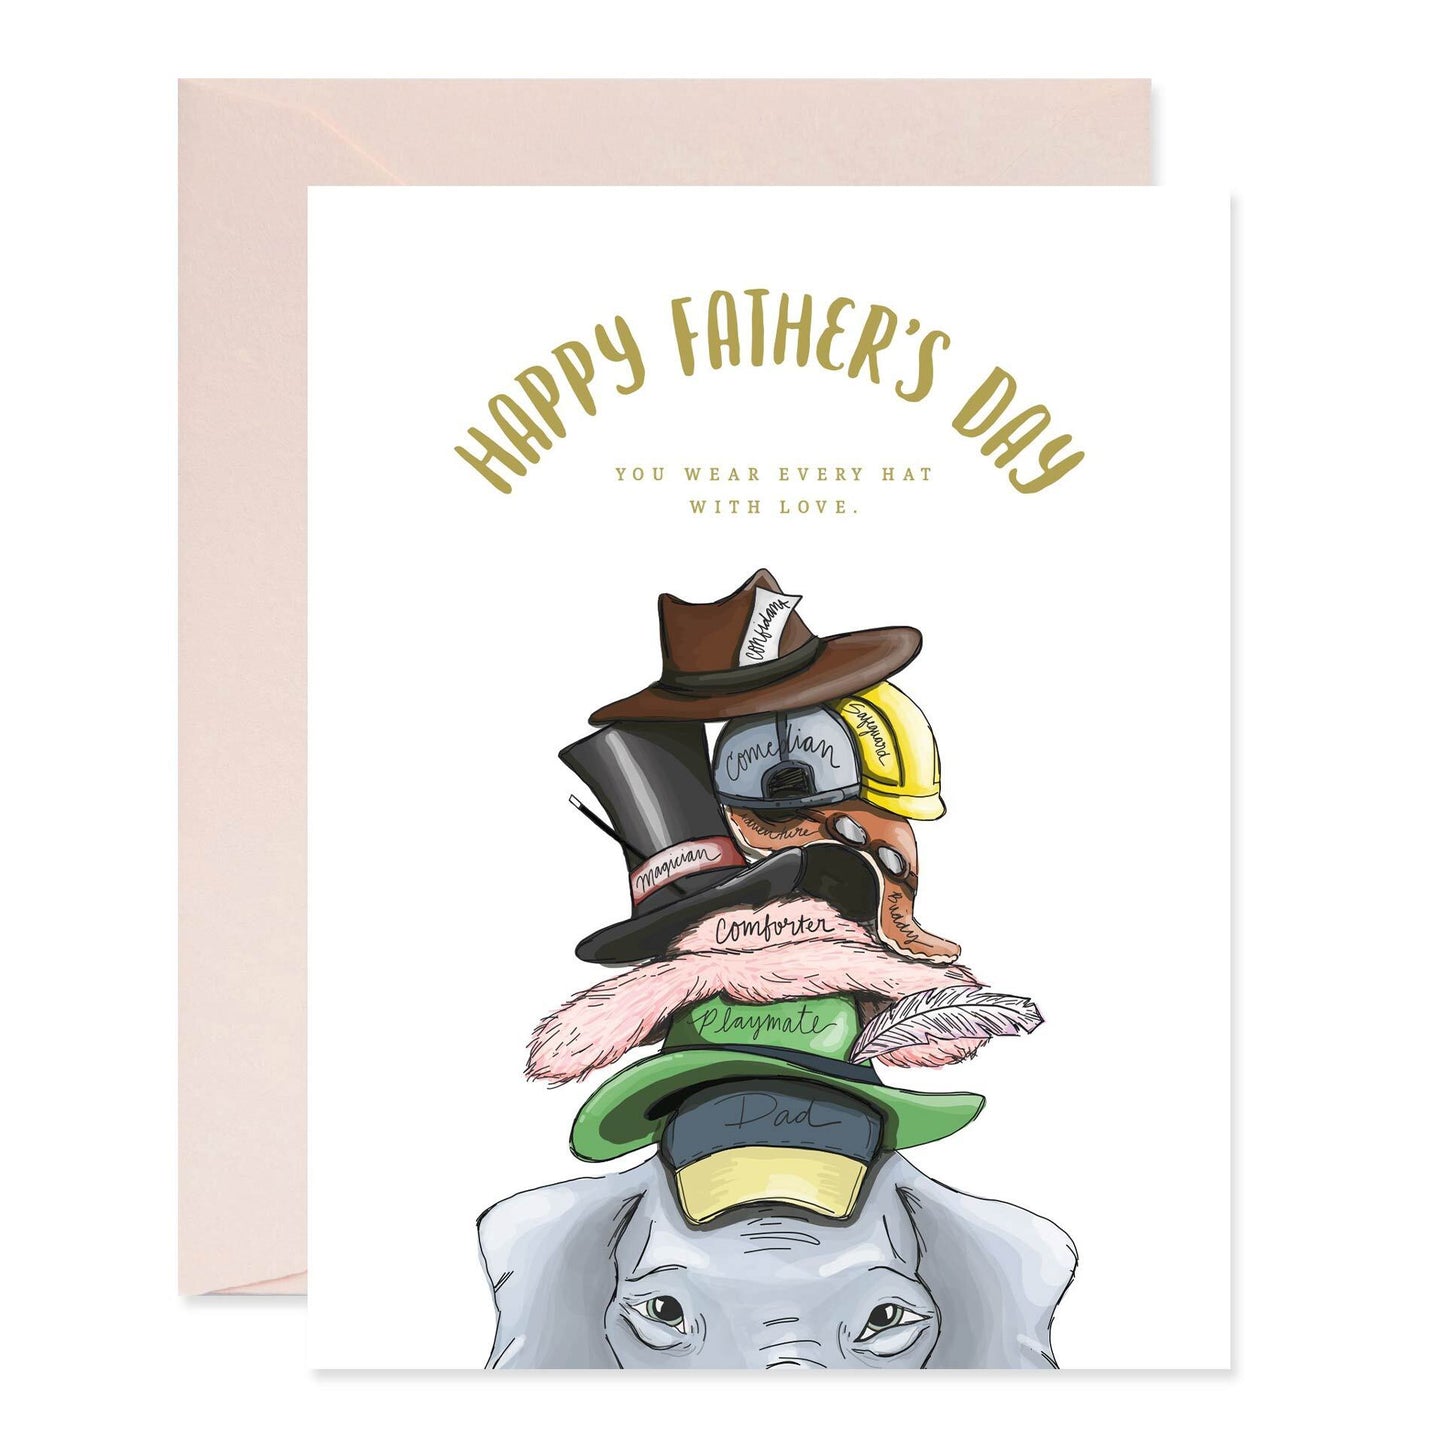 Many Hats Happy Father's Day Card